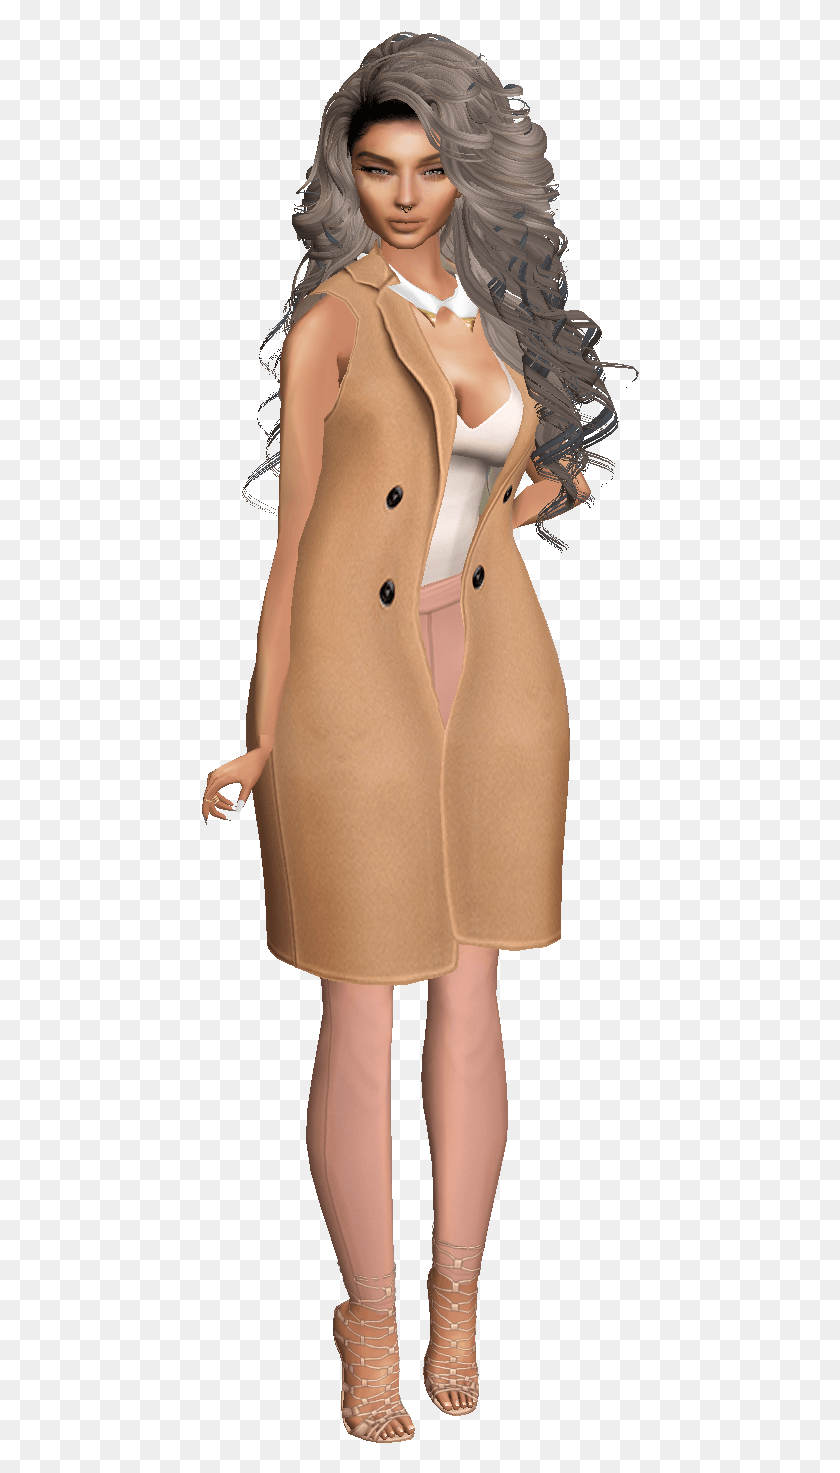 438x1413 Kylie Jenner Imvu Chica, Ropa, Ropa, Persona Hd Png